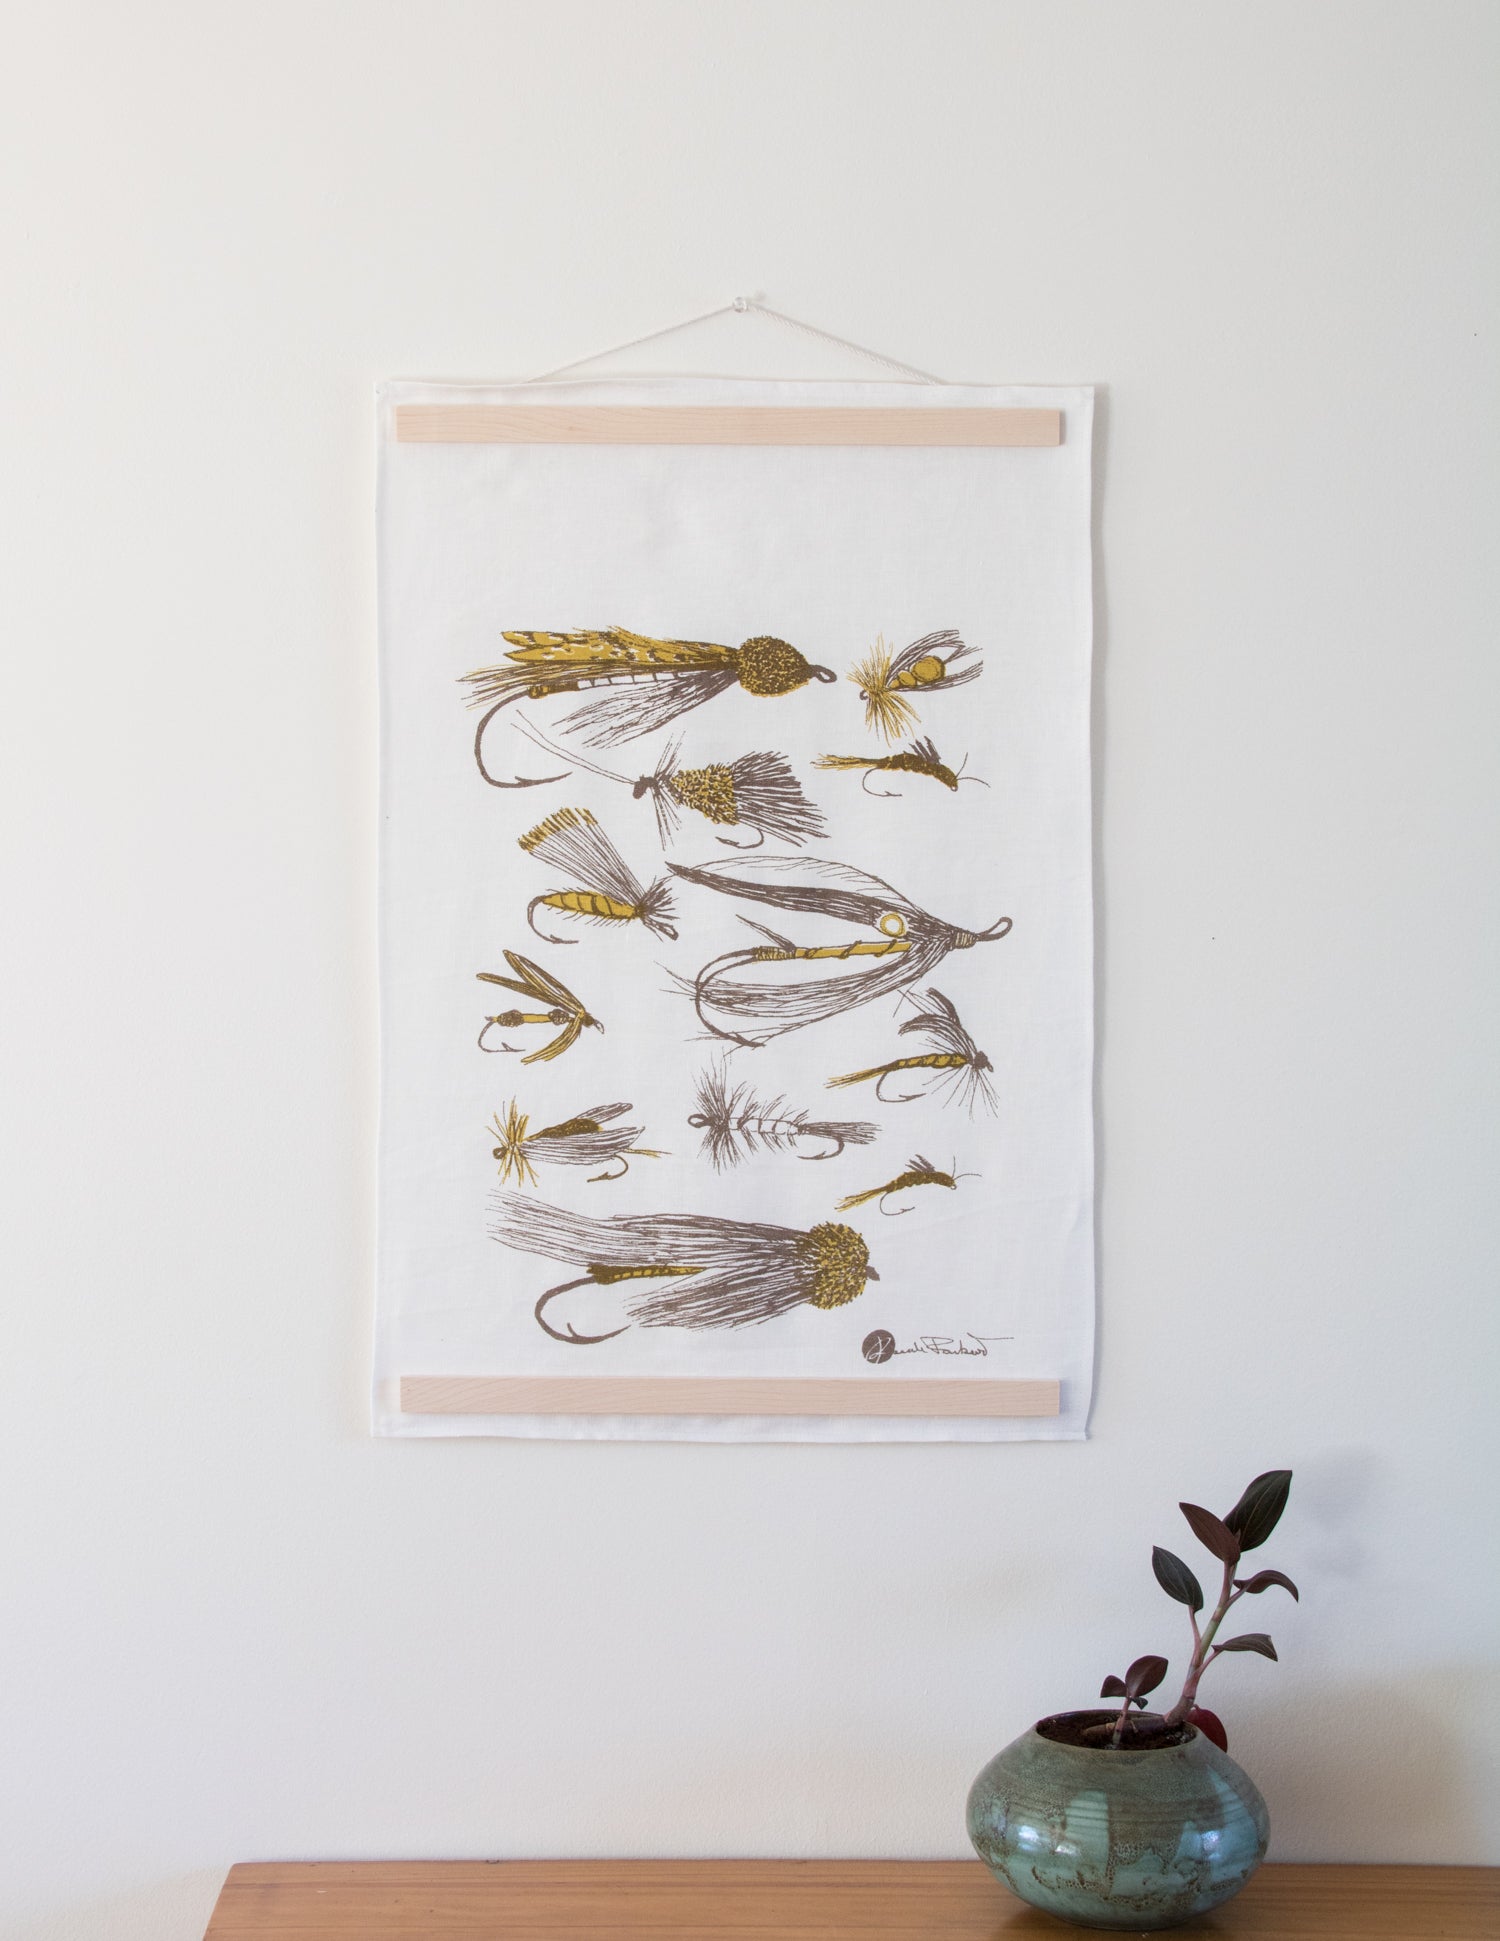 Embellish your decor with this unique decorative poster, inspired